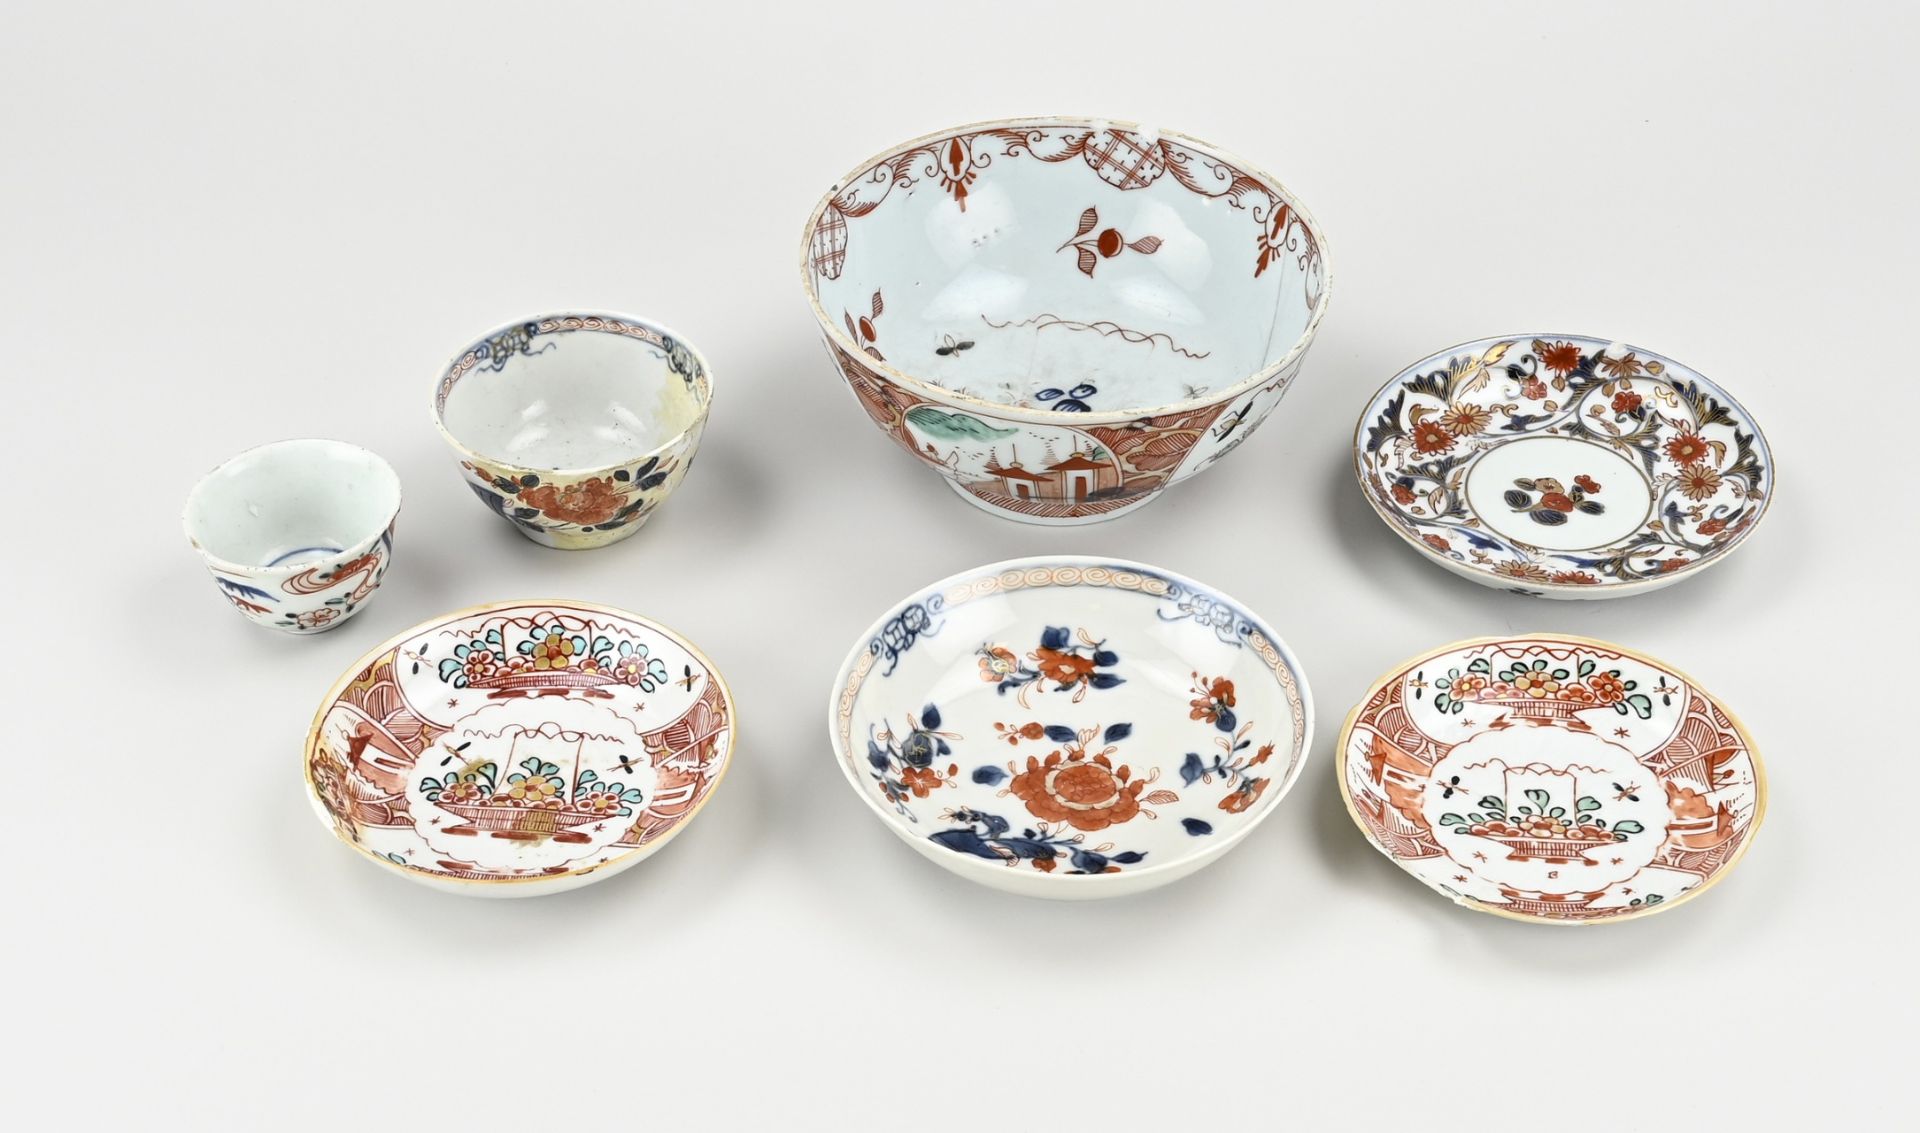 Lot Chinese porcelain (7x)